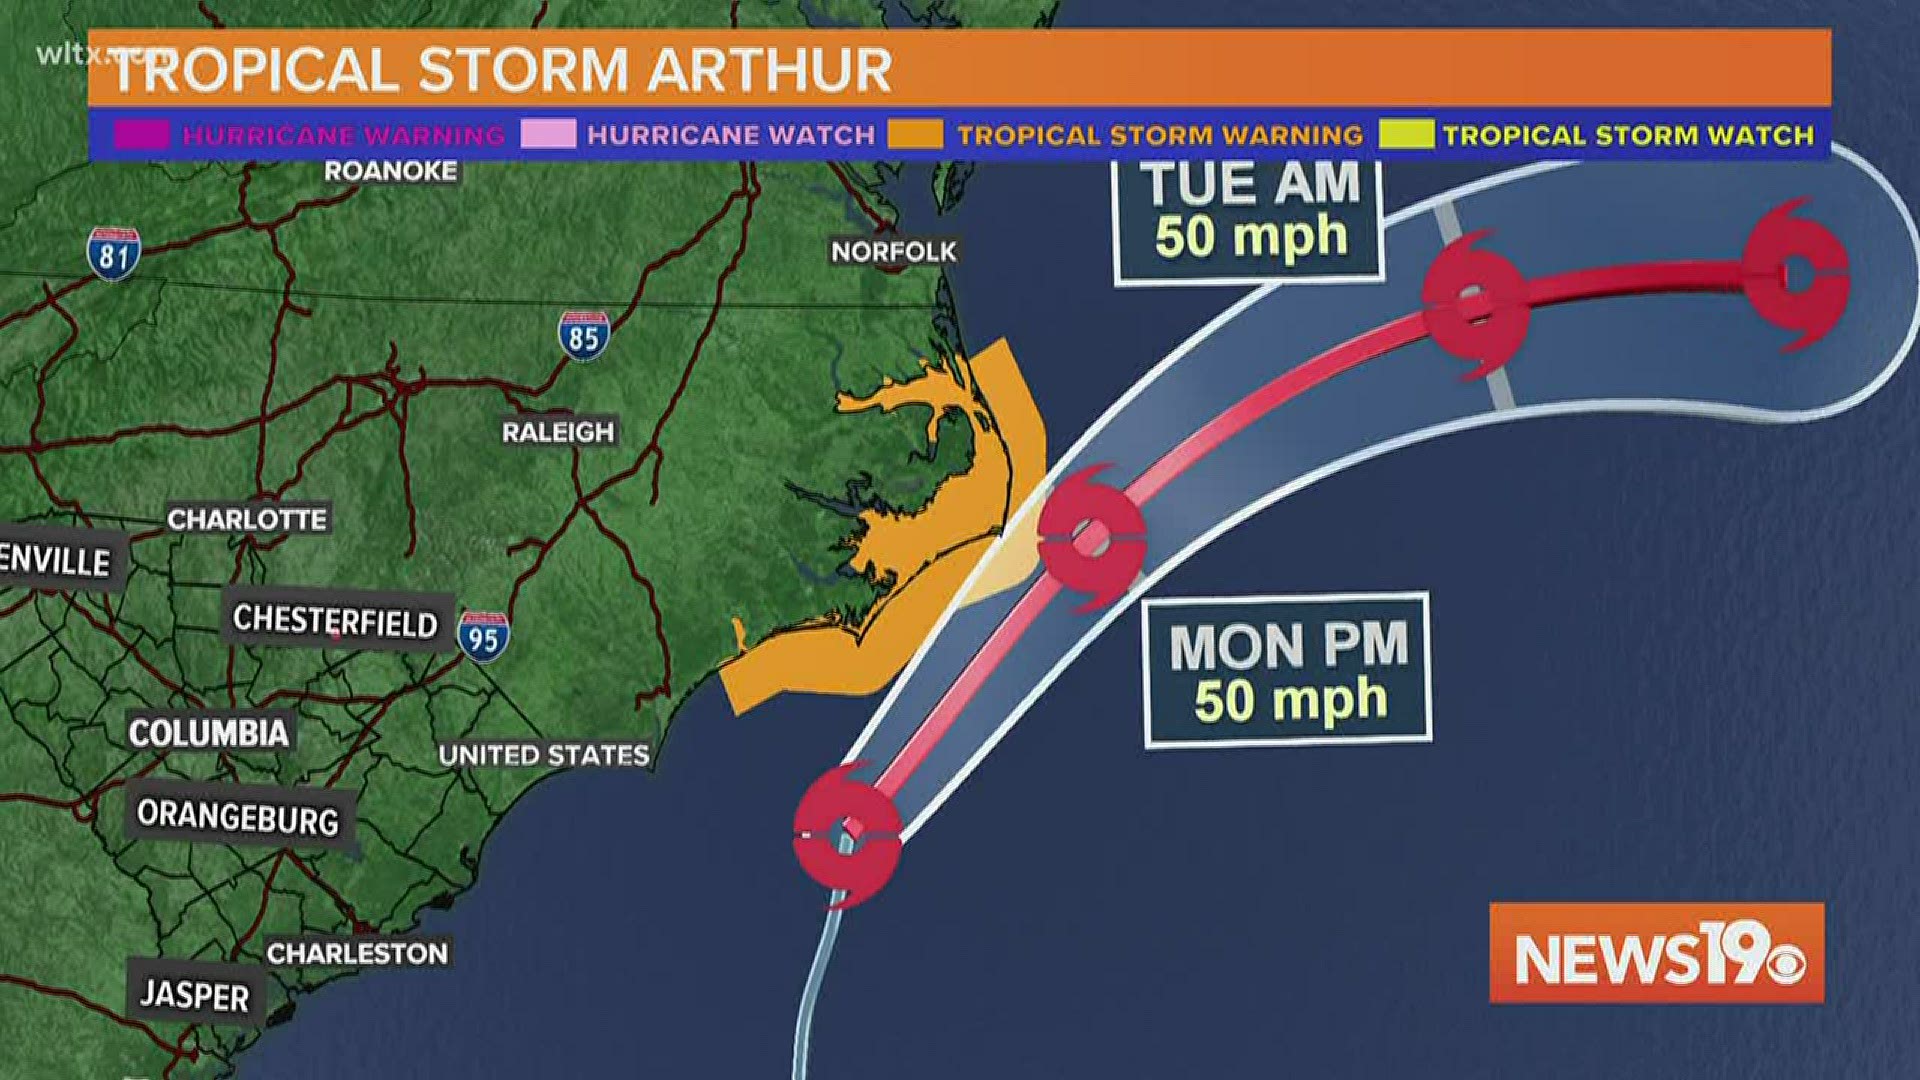 Tropical Storm Arthur brings rain and wind to Eastern North Carolina on Monday morning.